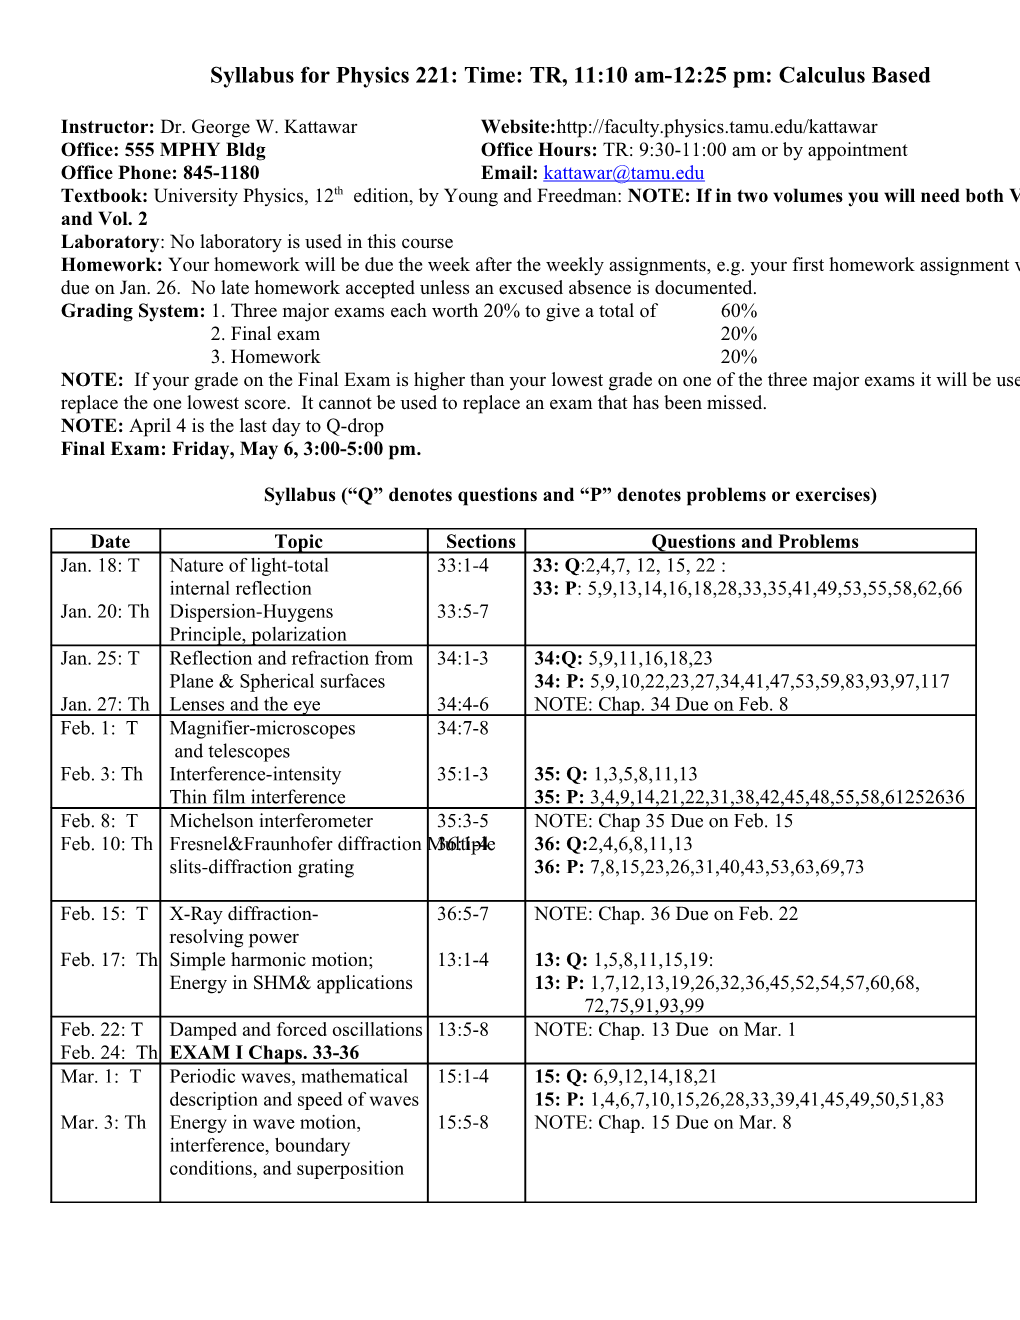 Syllabus for Physics 201-Honors-Calculus Based